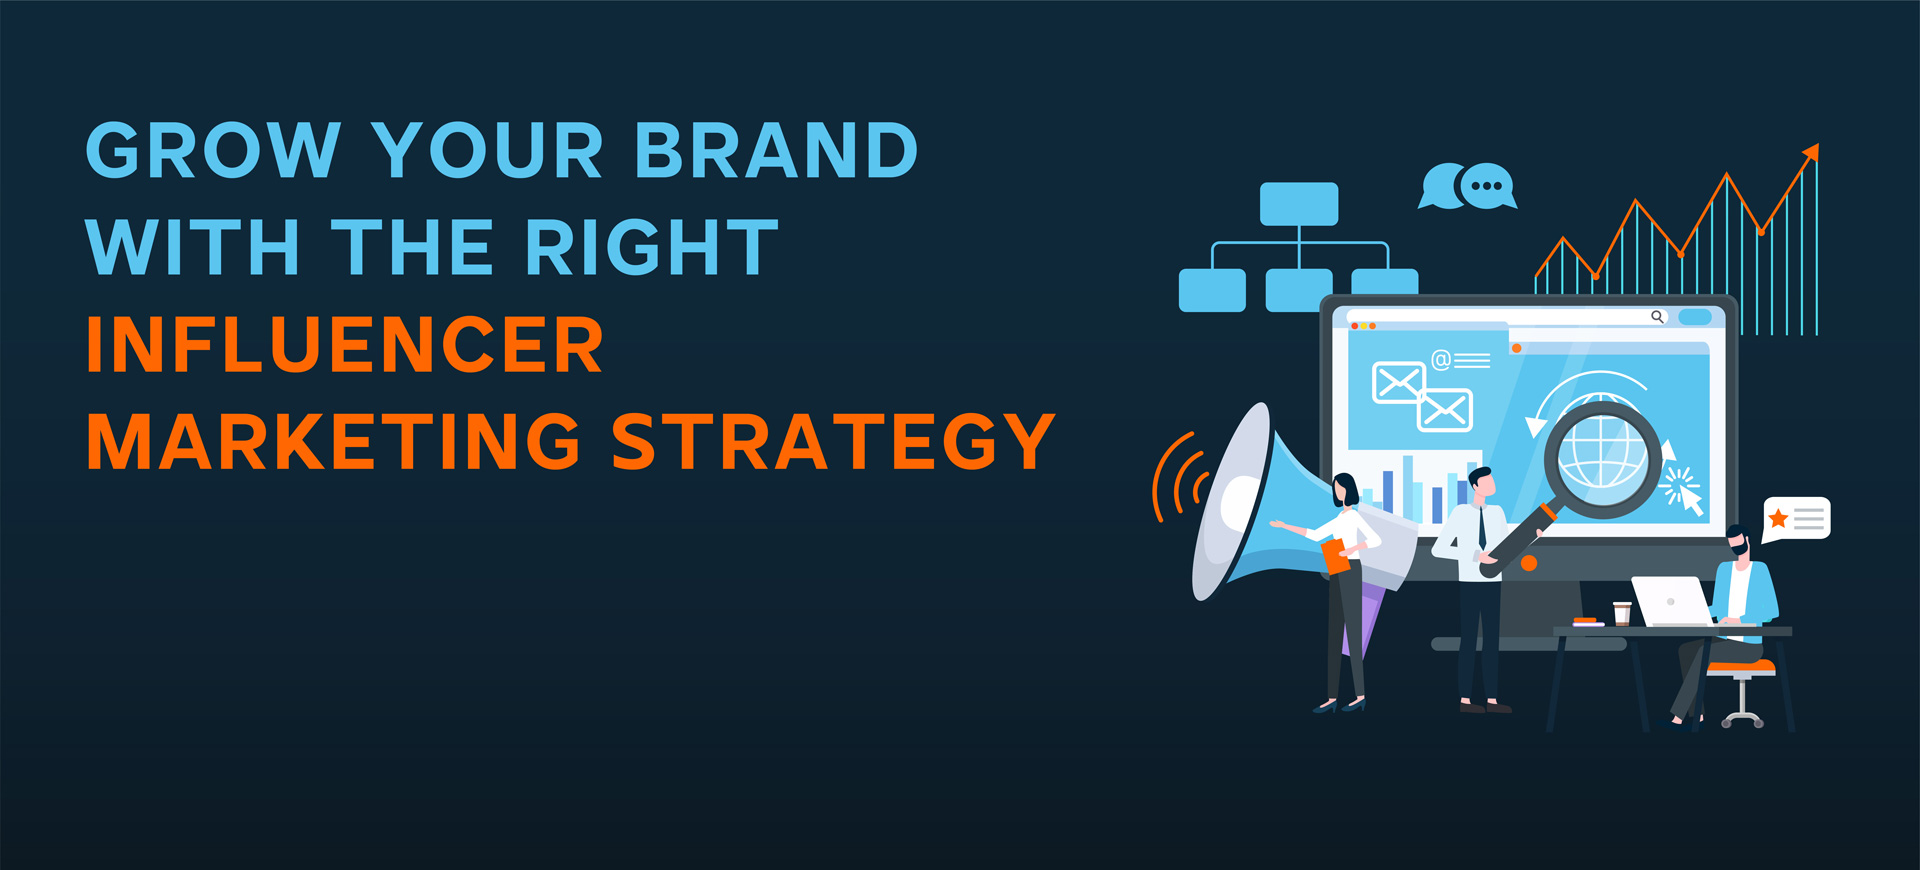 Grow Your Brand With The Right Influencer Marketing Strategy